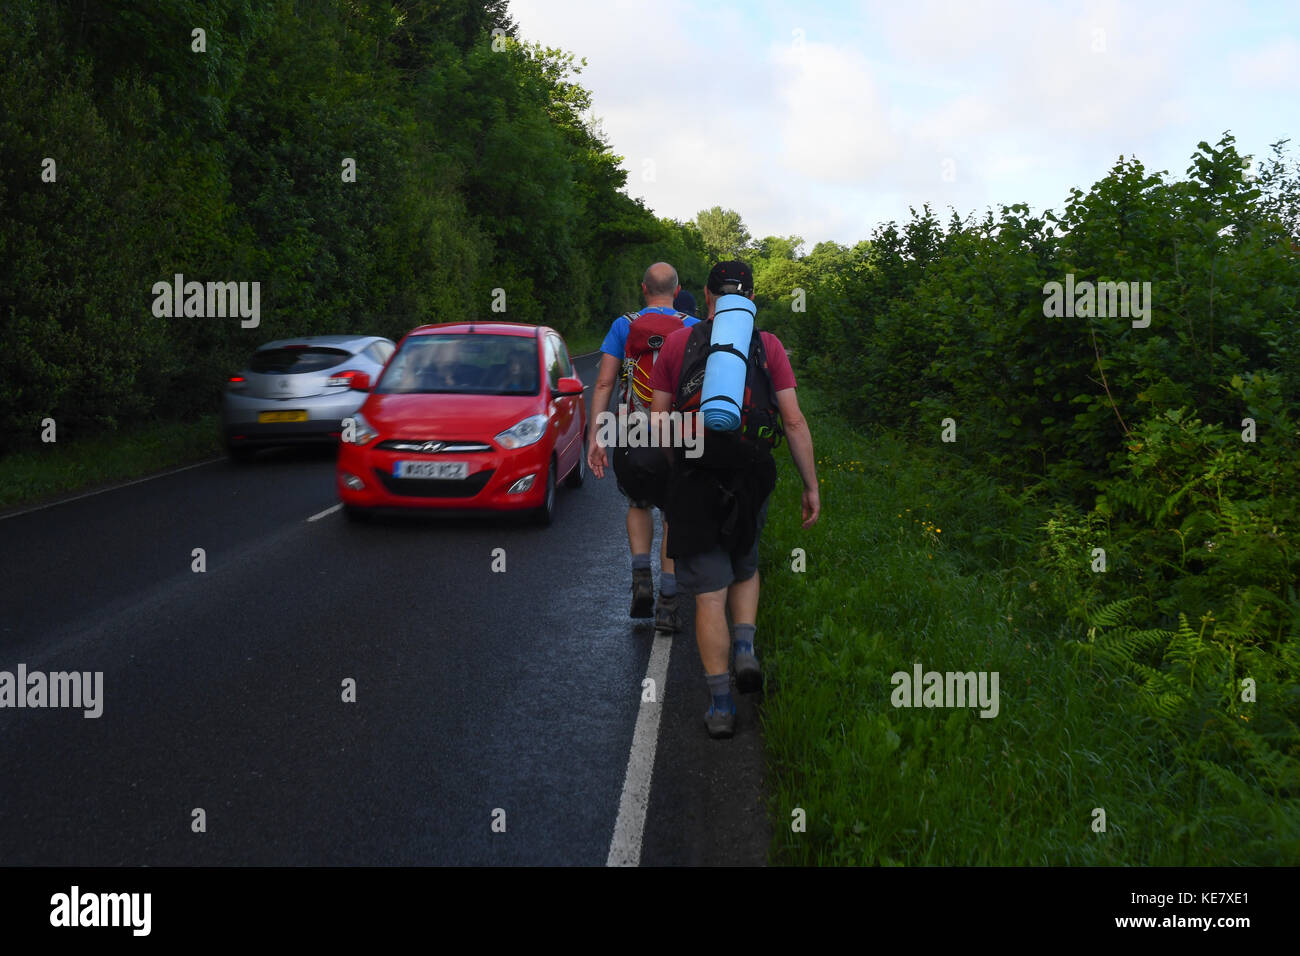 Ramblers walk up a road without a footpath into oncoming traffic Stock Photo